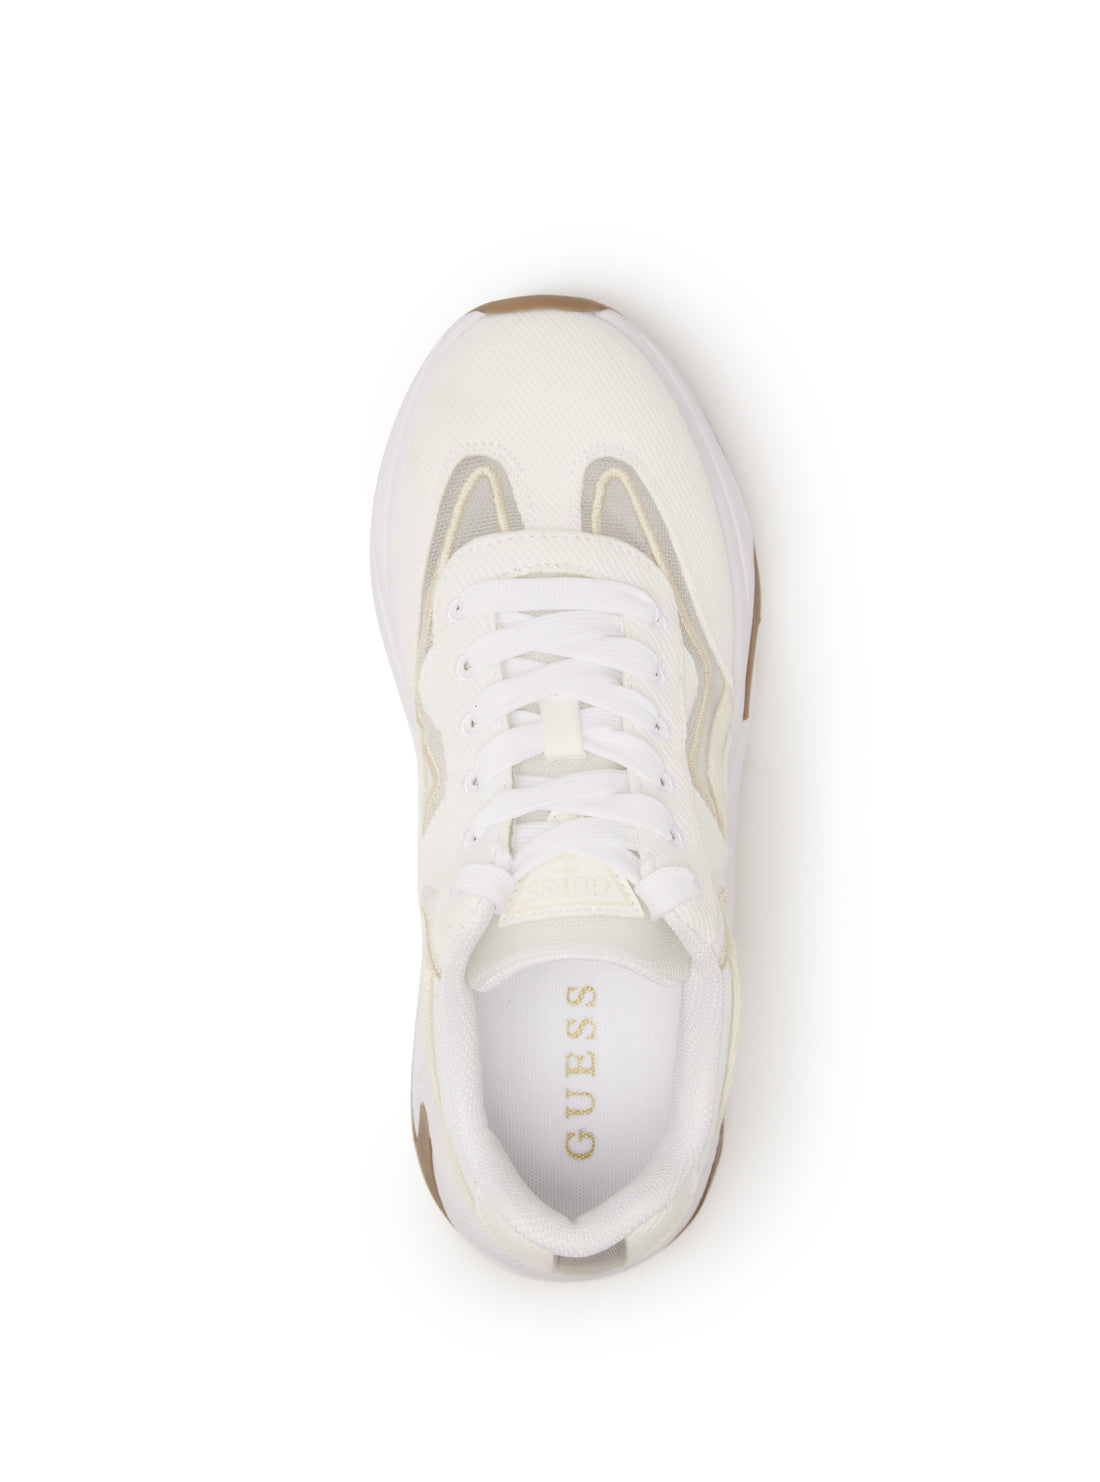 GUESS Women's White Gwenie Low Top Sneakers GWENIE Top View